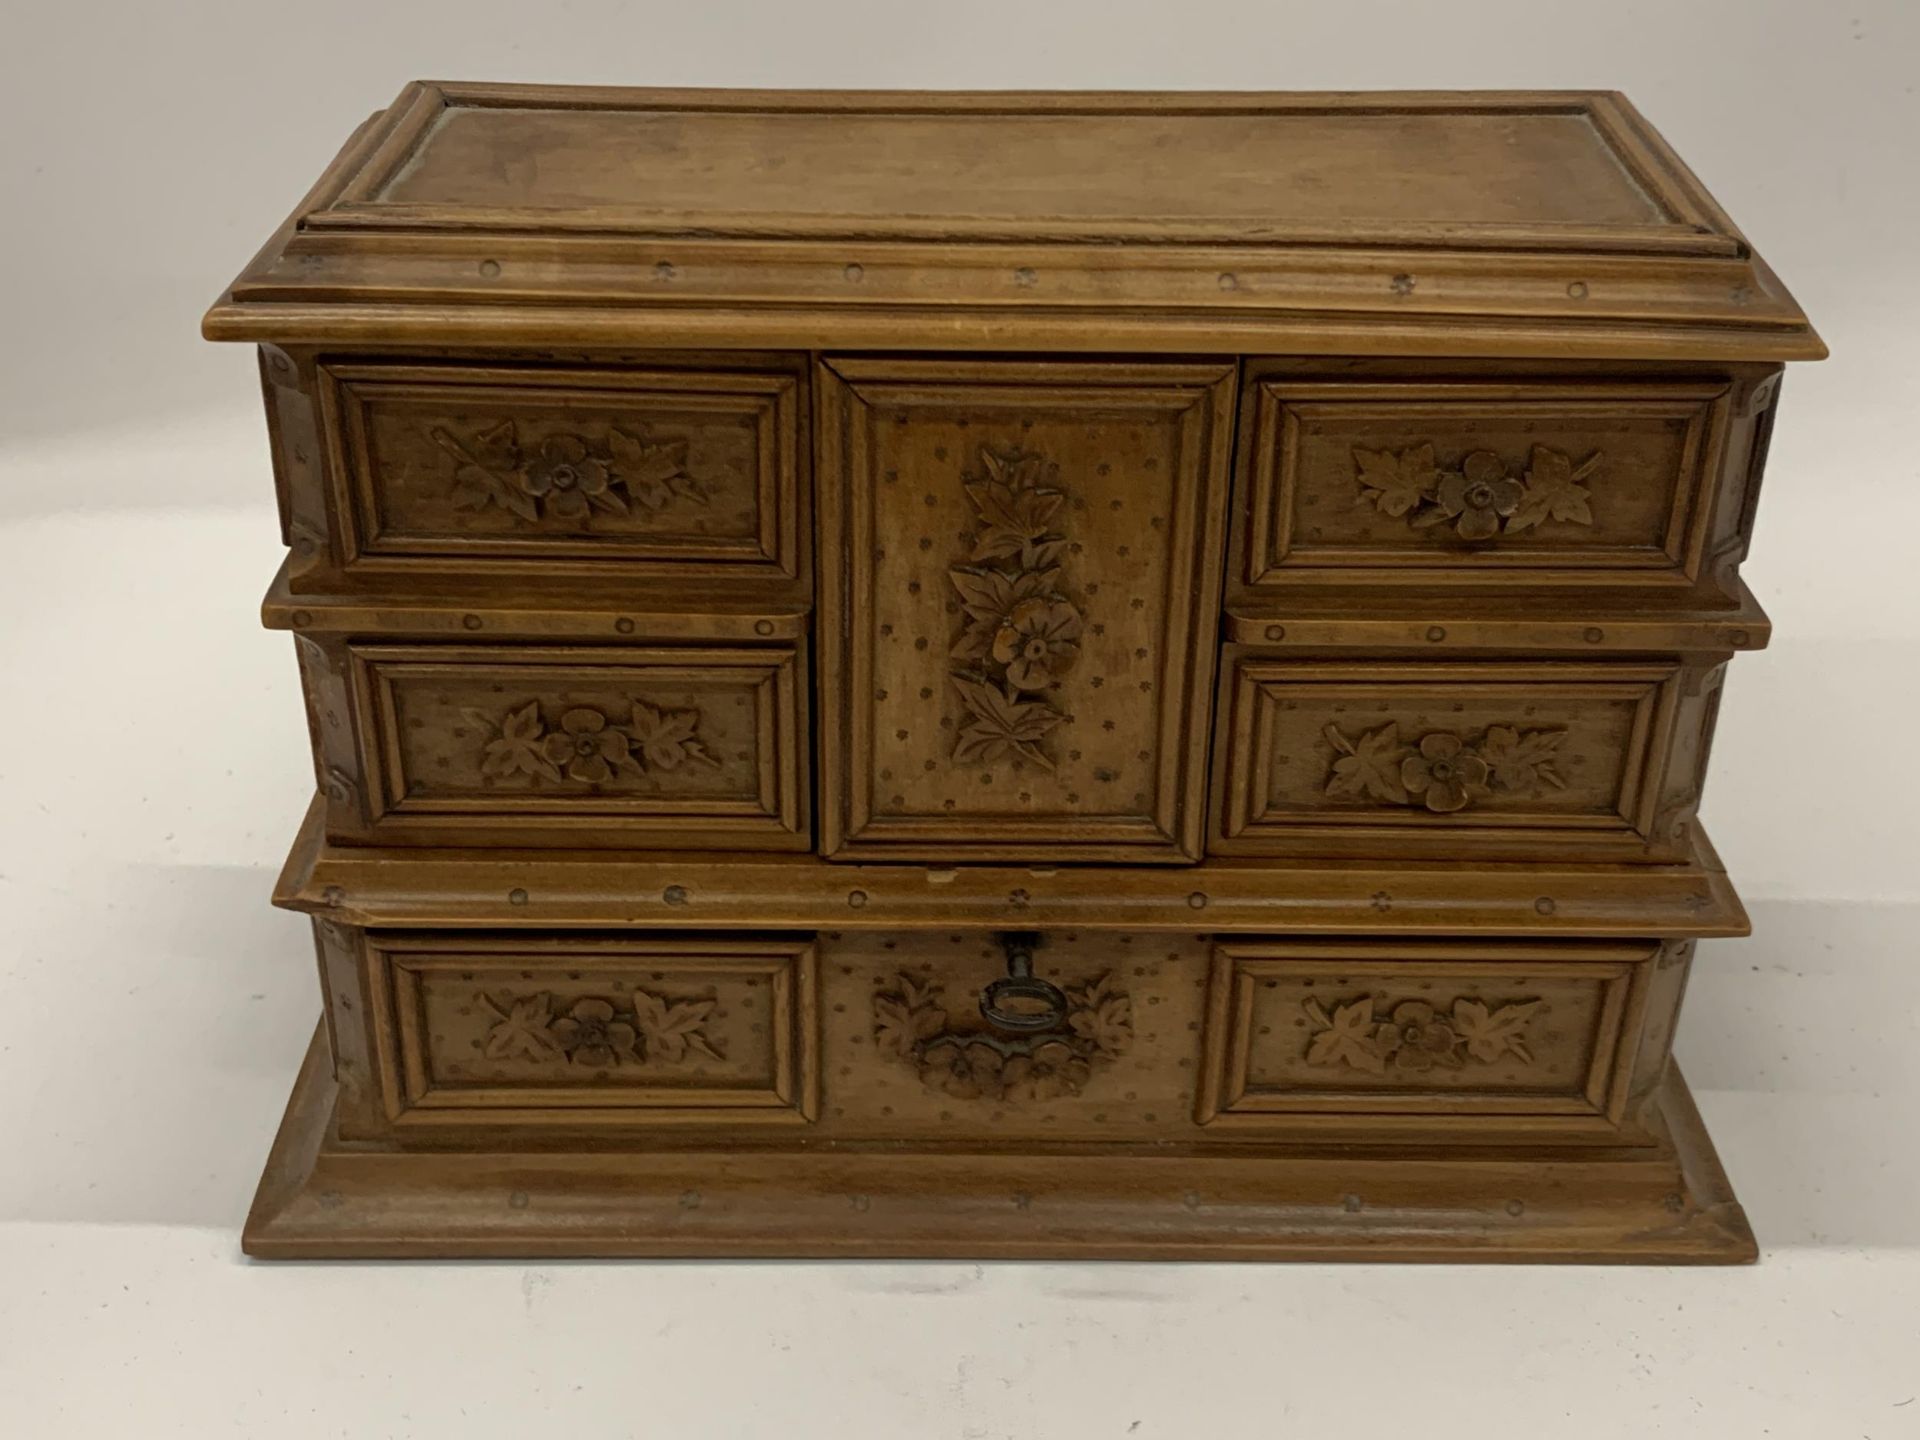 A CARVED SATINWOOD TABLE TOP SEWING CABINET WITH LIFT UP LID AND INNER DRAWERS, HEIGHT 17CM